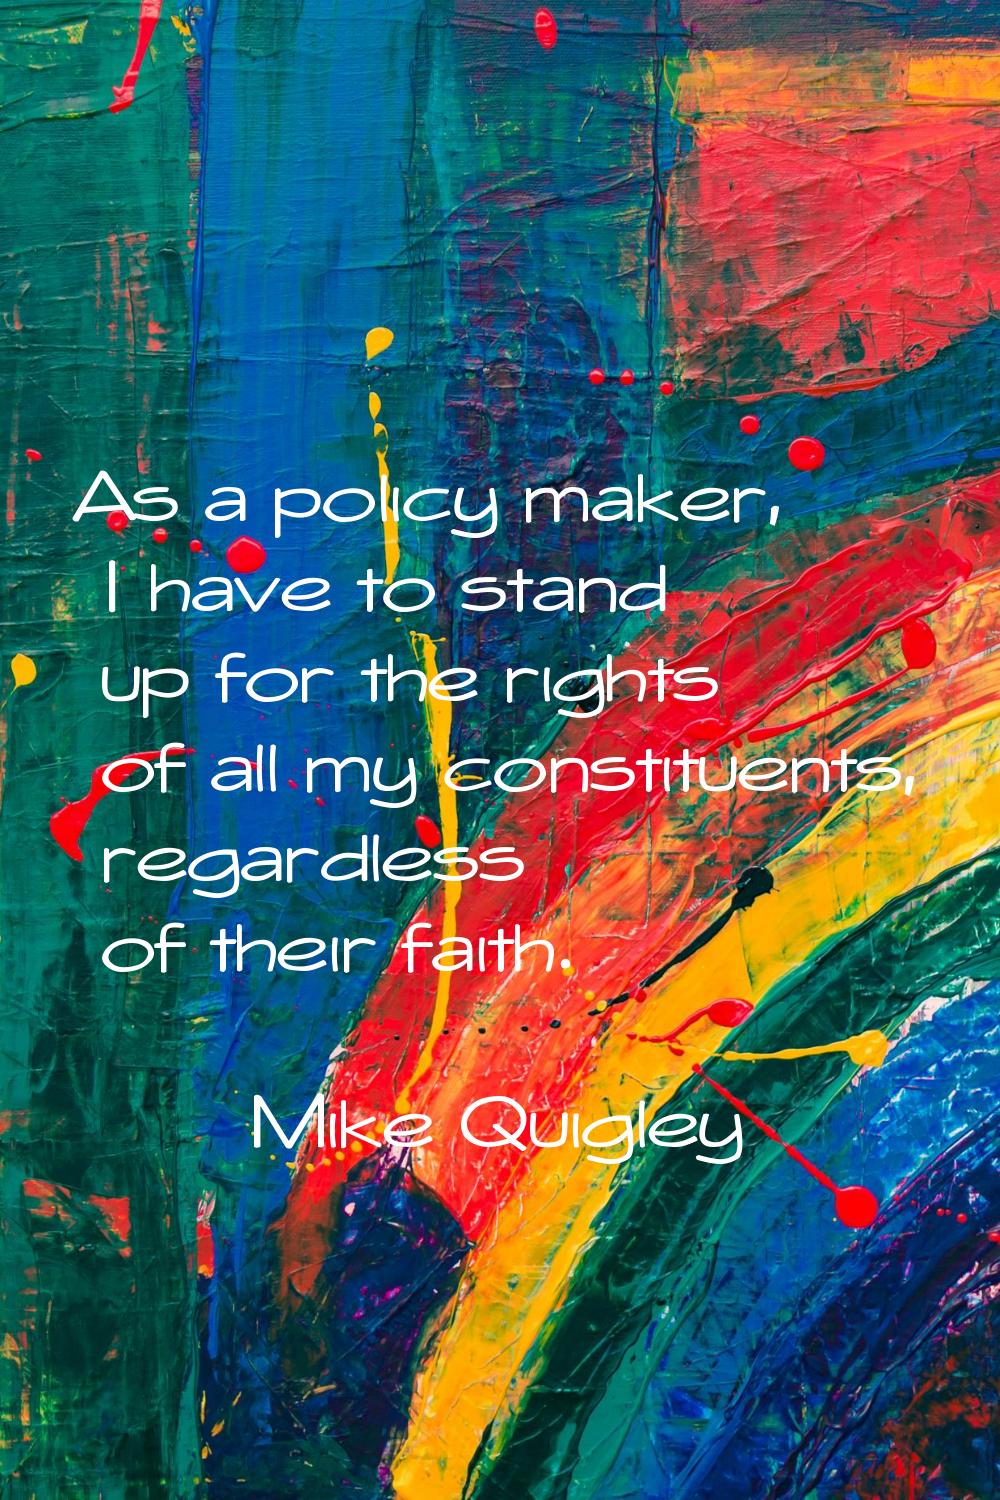 As a policy maker, I have to stand up for the rights of all my constituents, regardless of their fa